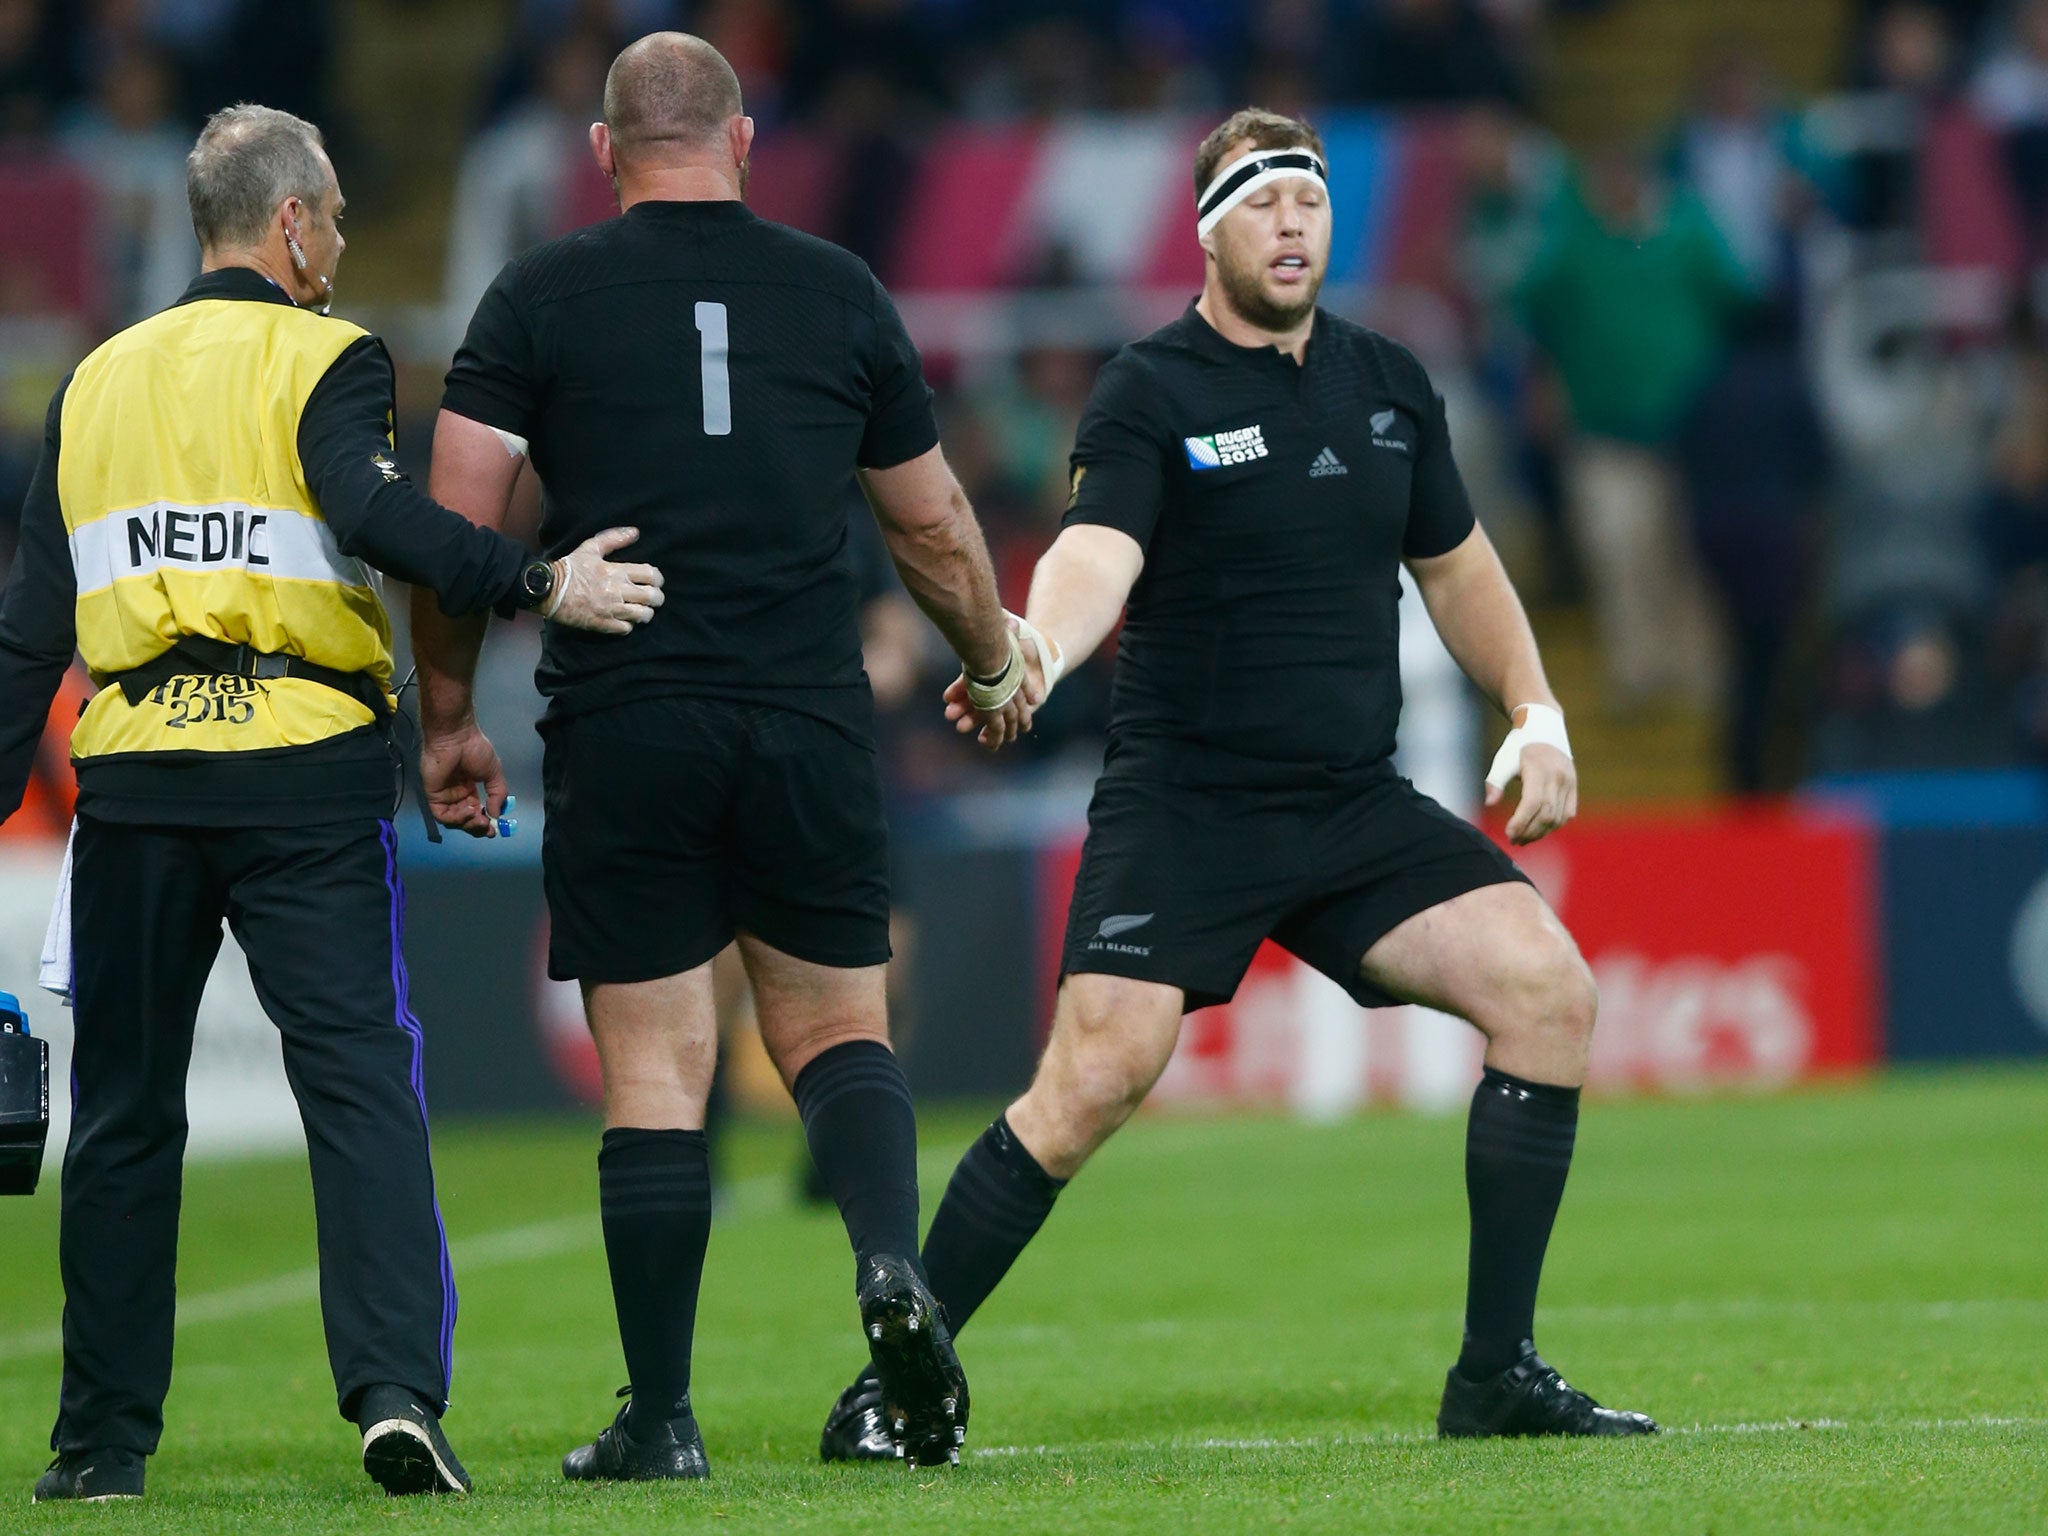 Tony Woodcock has been ruled out of the rest of the tournament after suffering a hamstring injury against Tonga